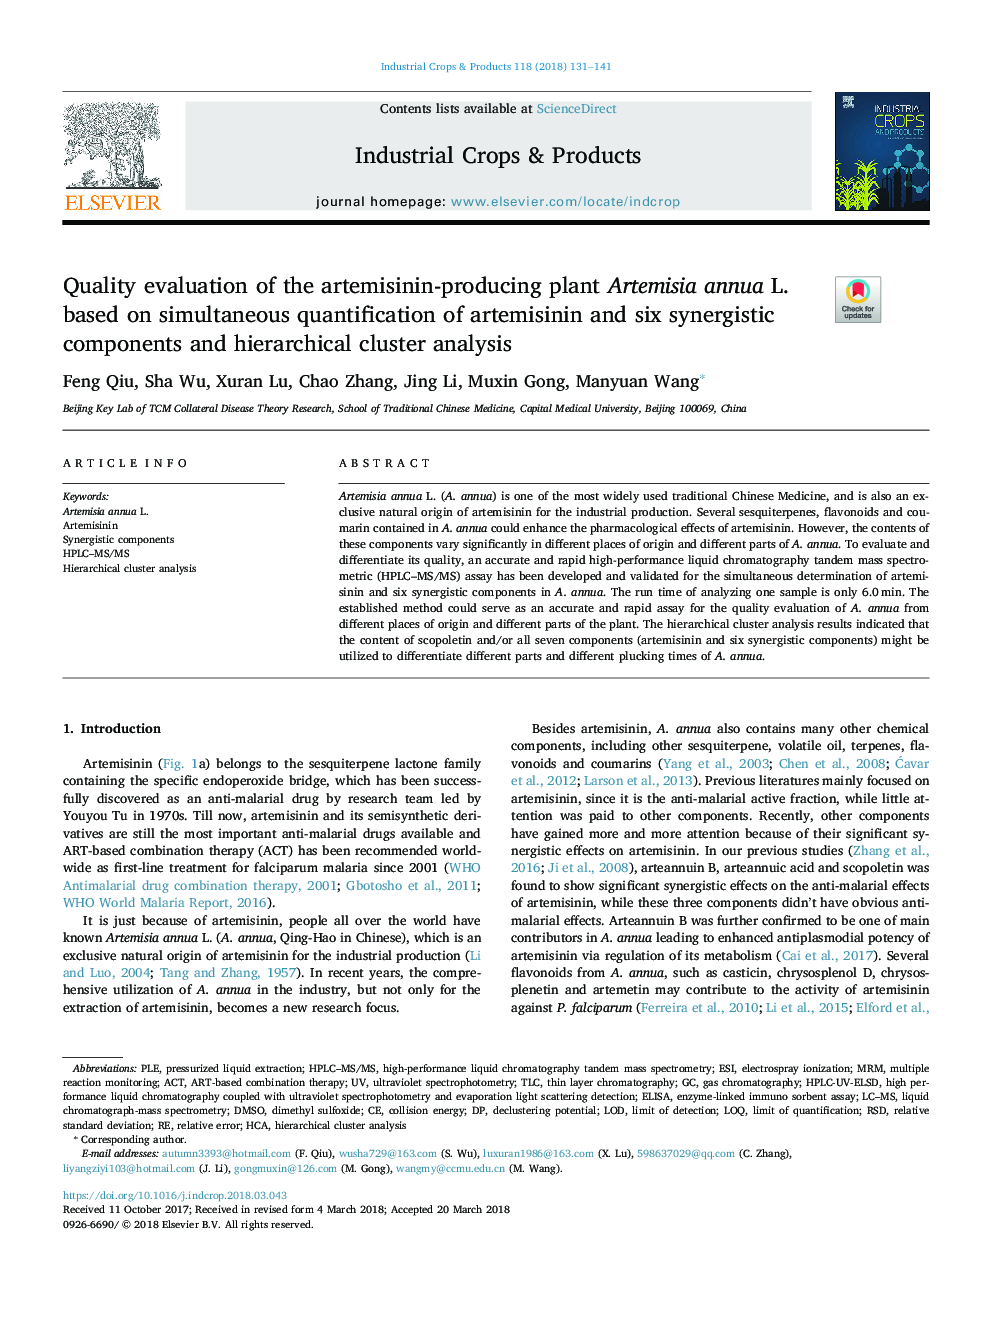 Quality evaluation of the artemisinin-producing plant Artemisia annua L. based on simultaneous quantification of artemisinin and six synergistic components and hierarchical cluster analysis